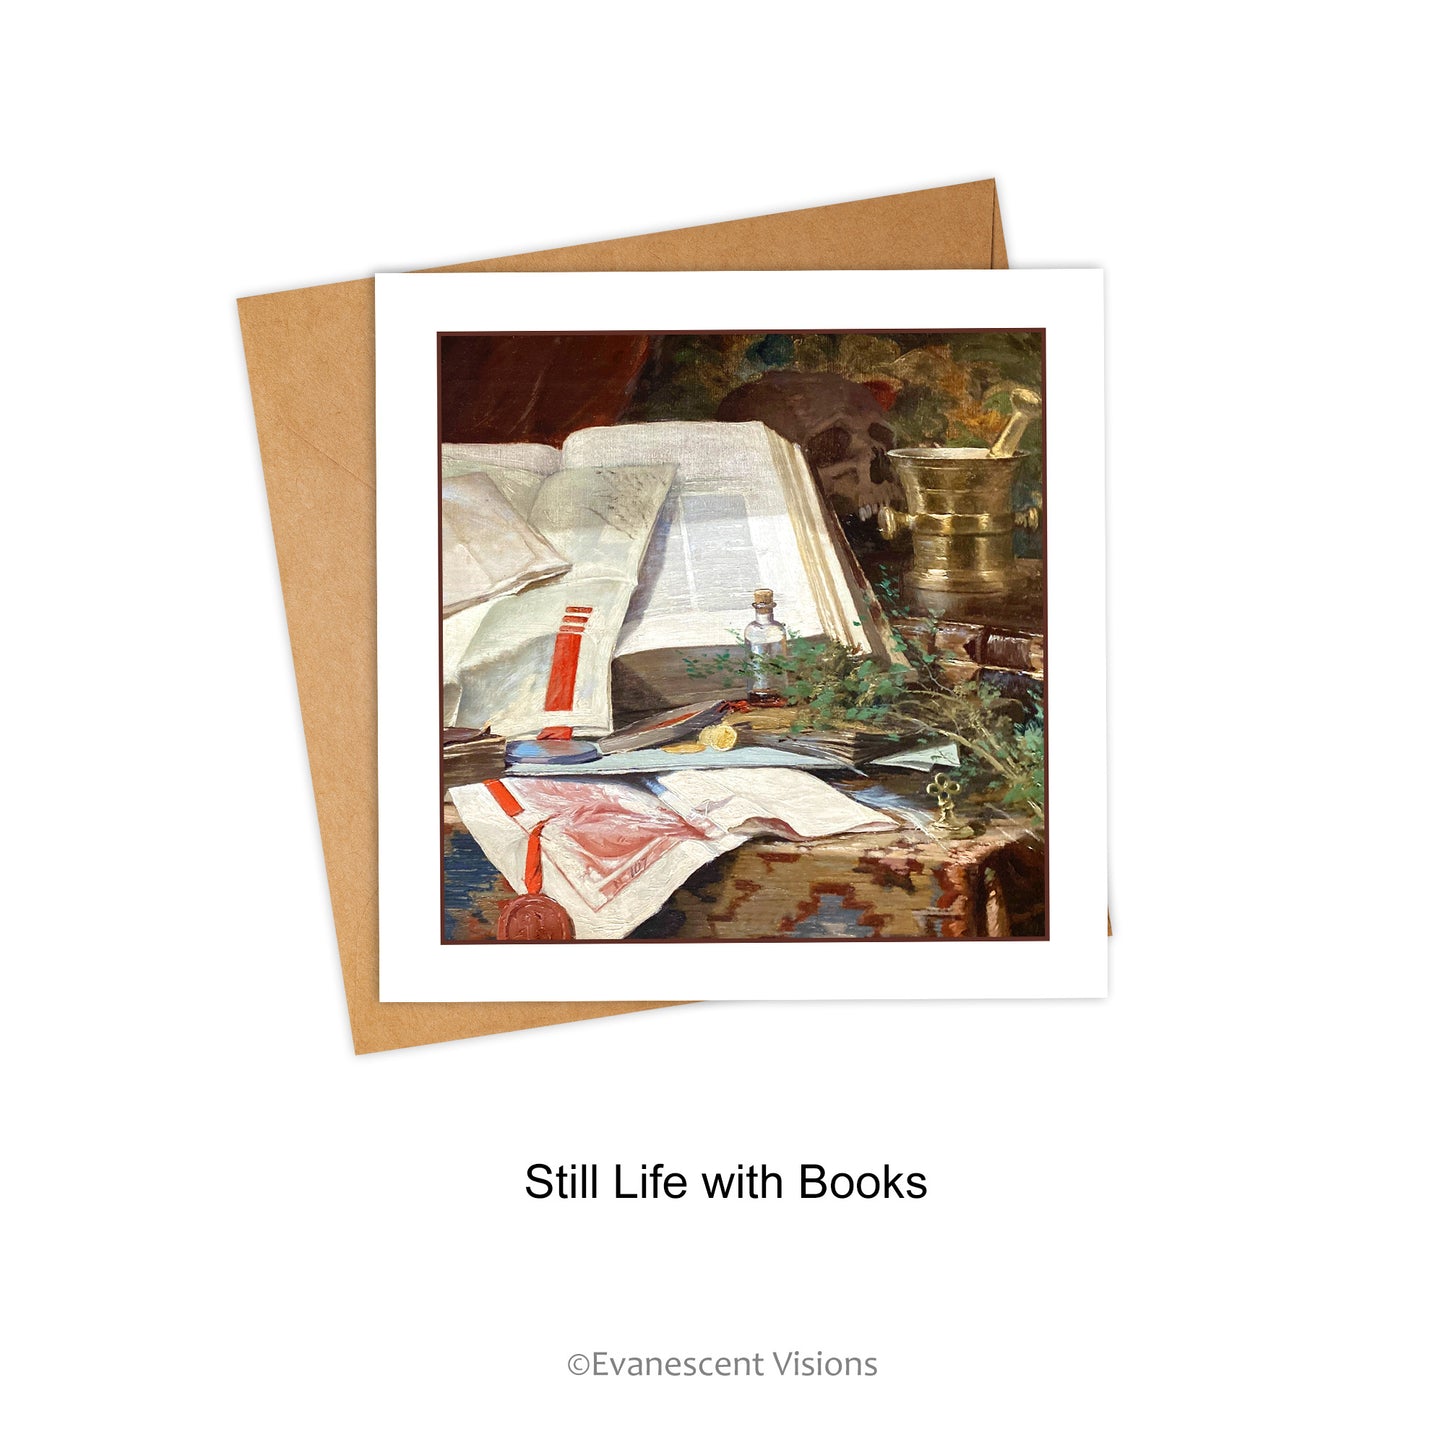 Card and envelope. Design Choice 'Still Life with Books' by Fernand Adriaenssens